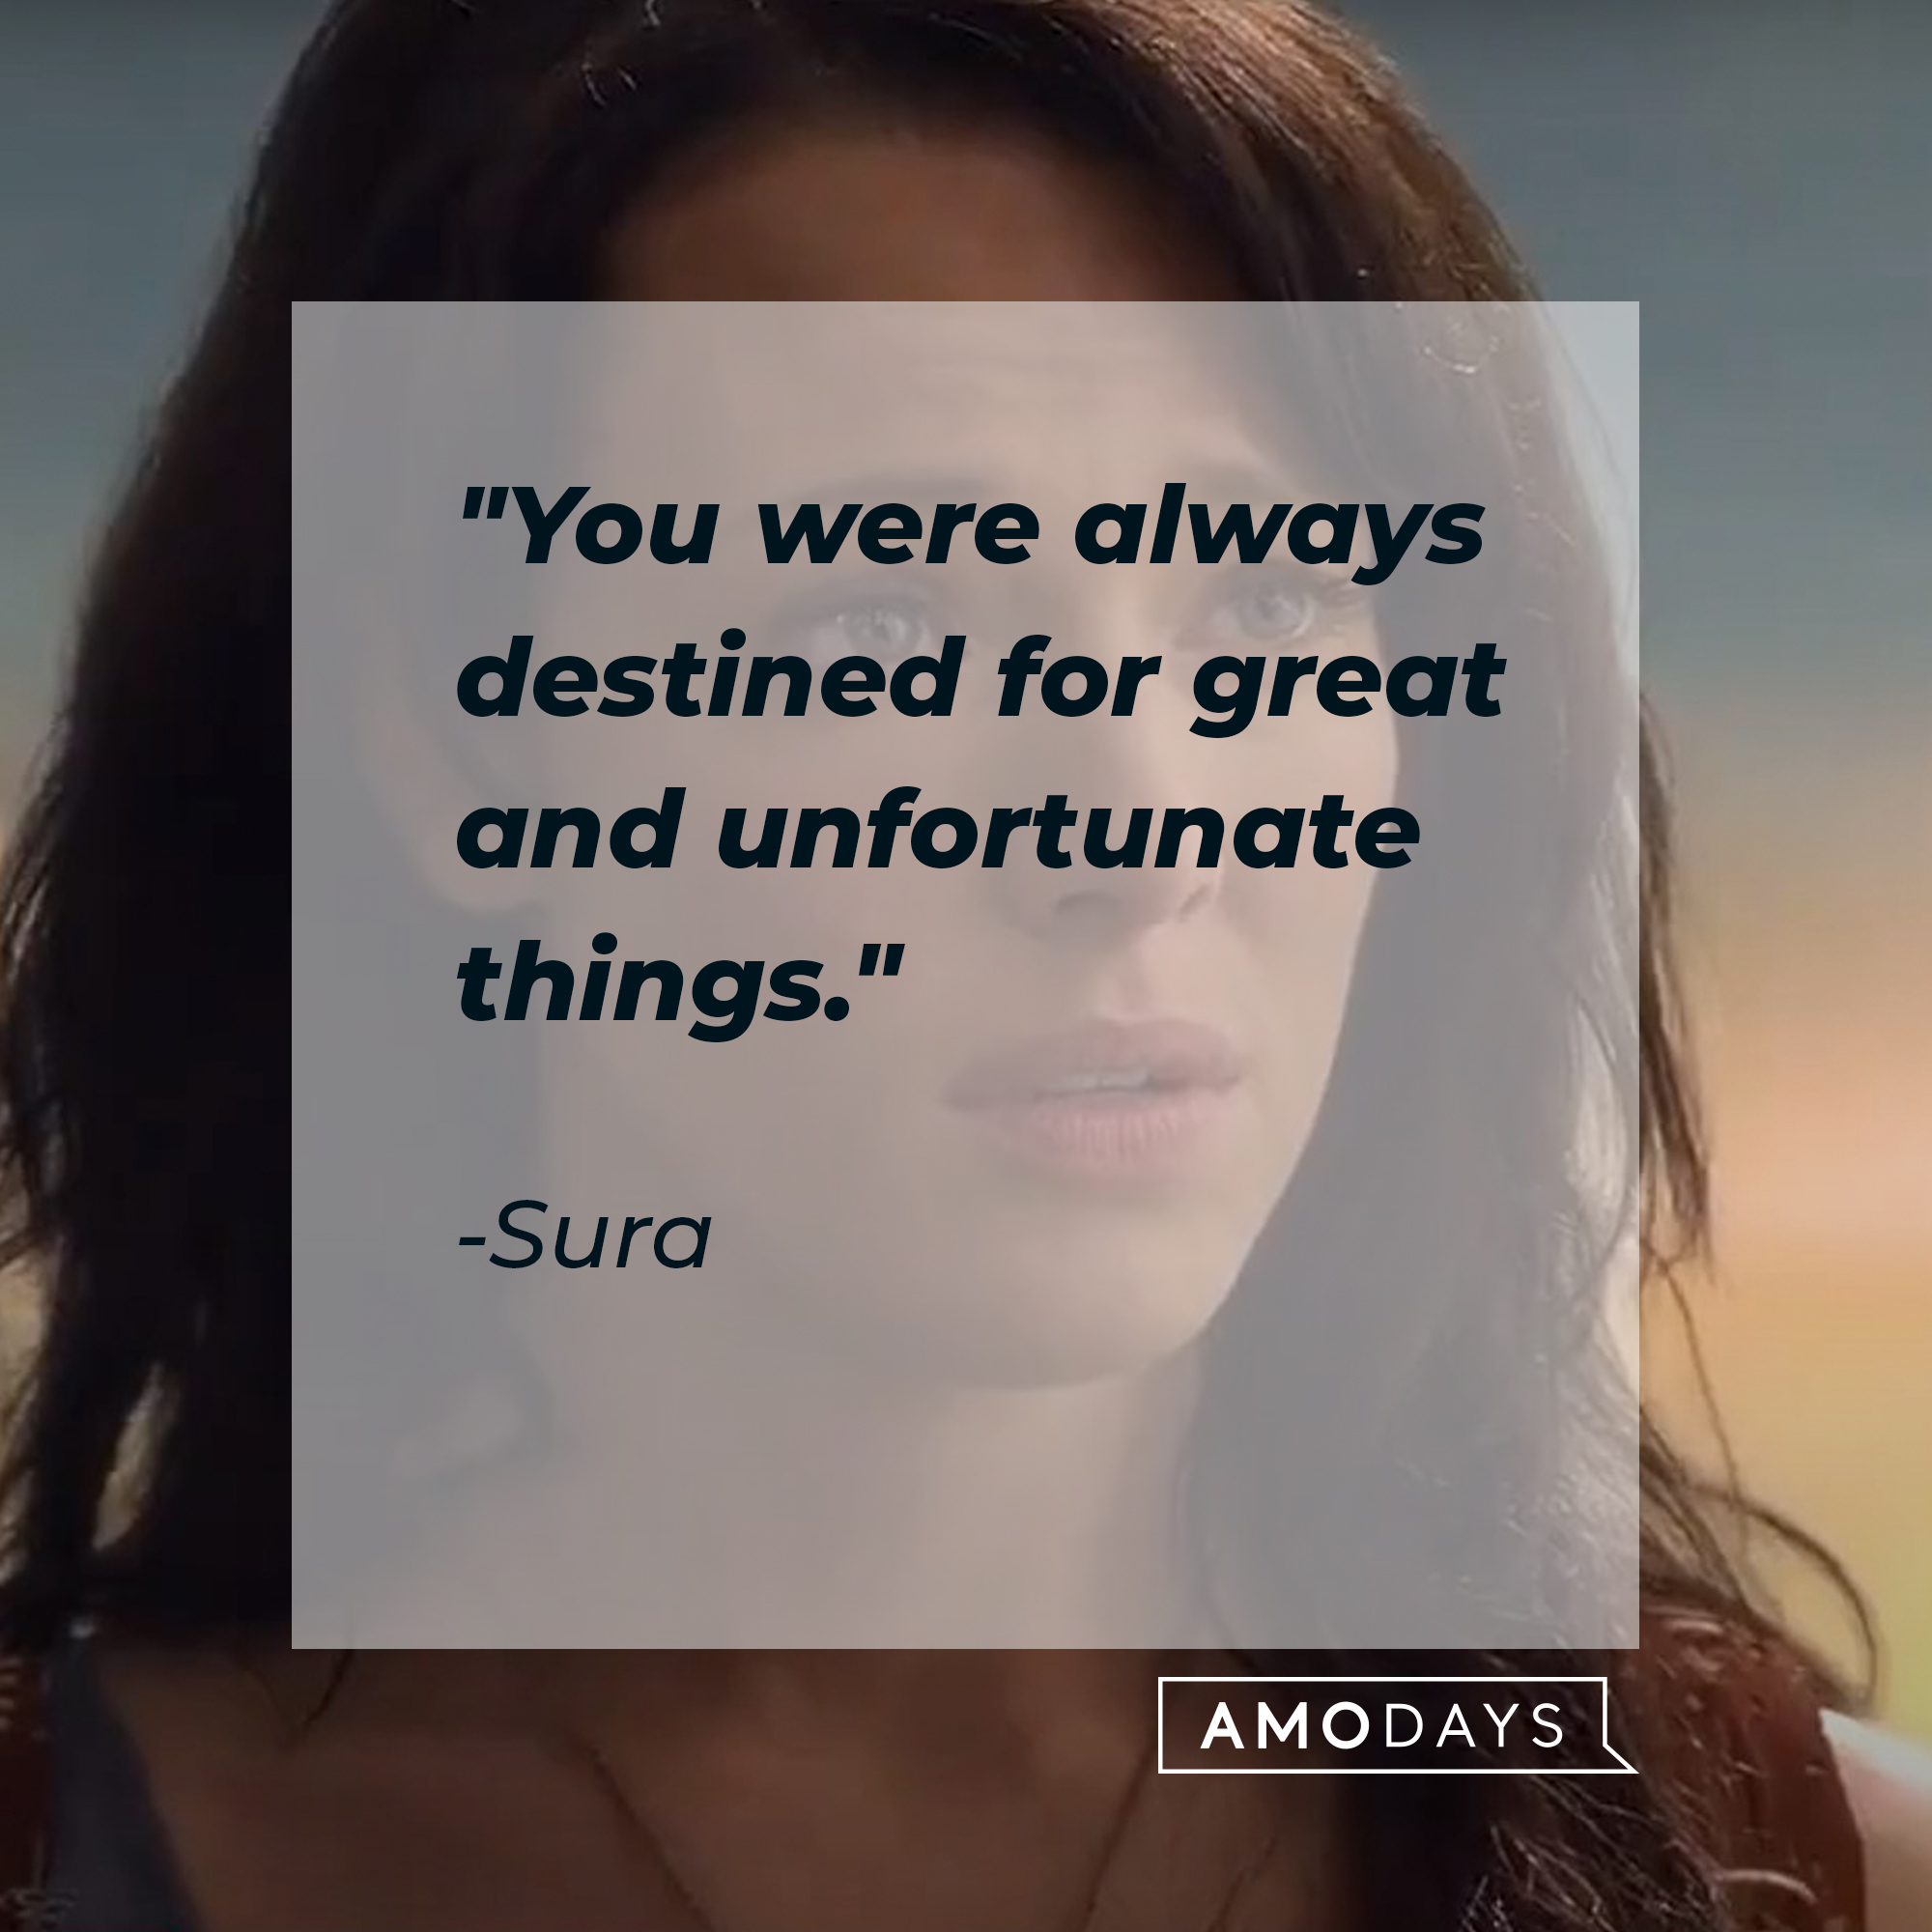 An image of the character Sura with her quote: "You were always destined for great and unfortunate things." | Source: youtube.com/Starz